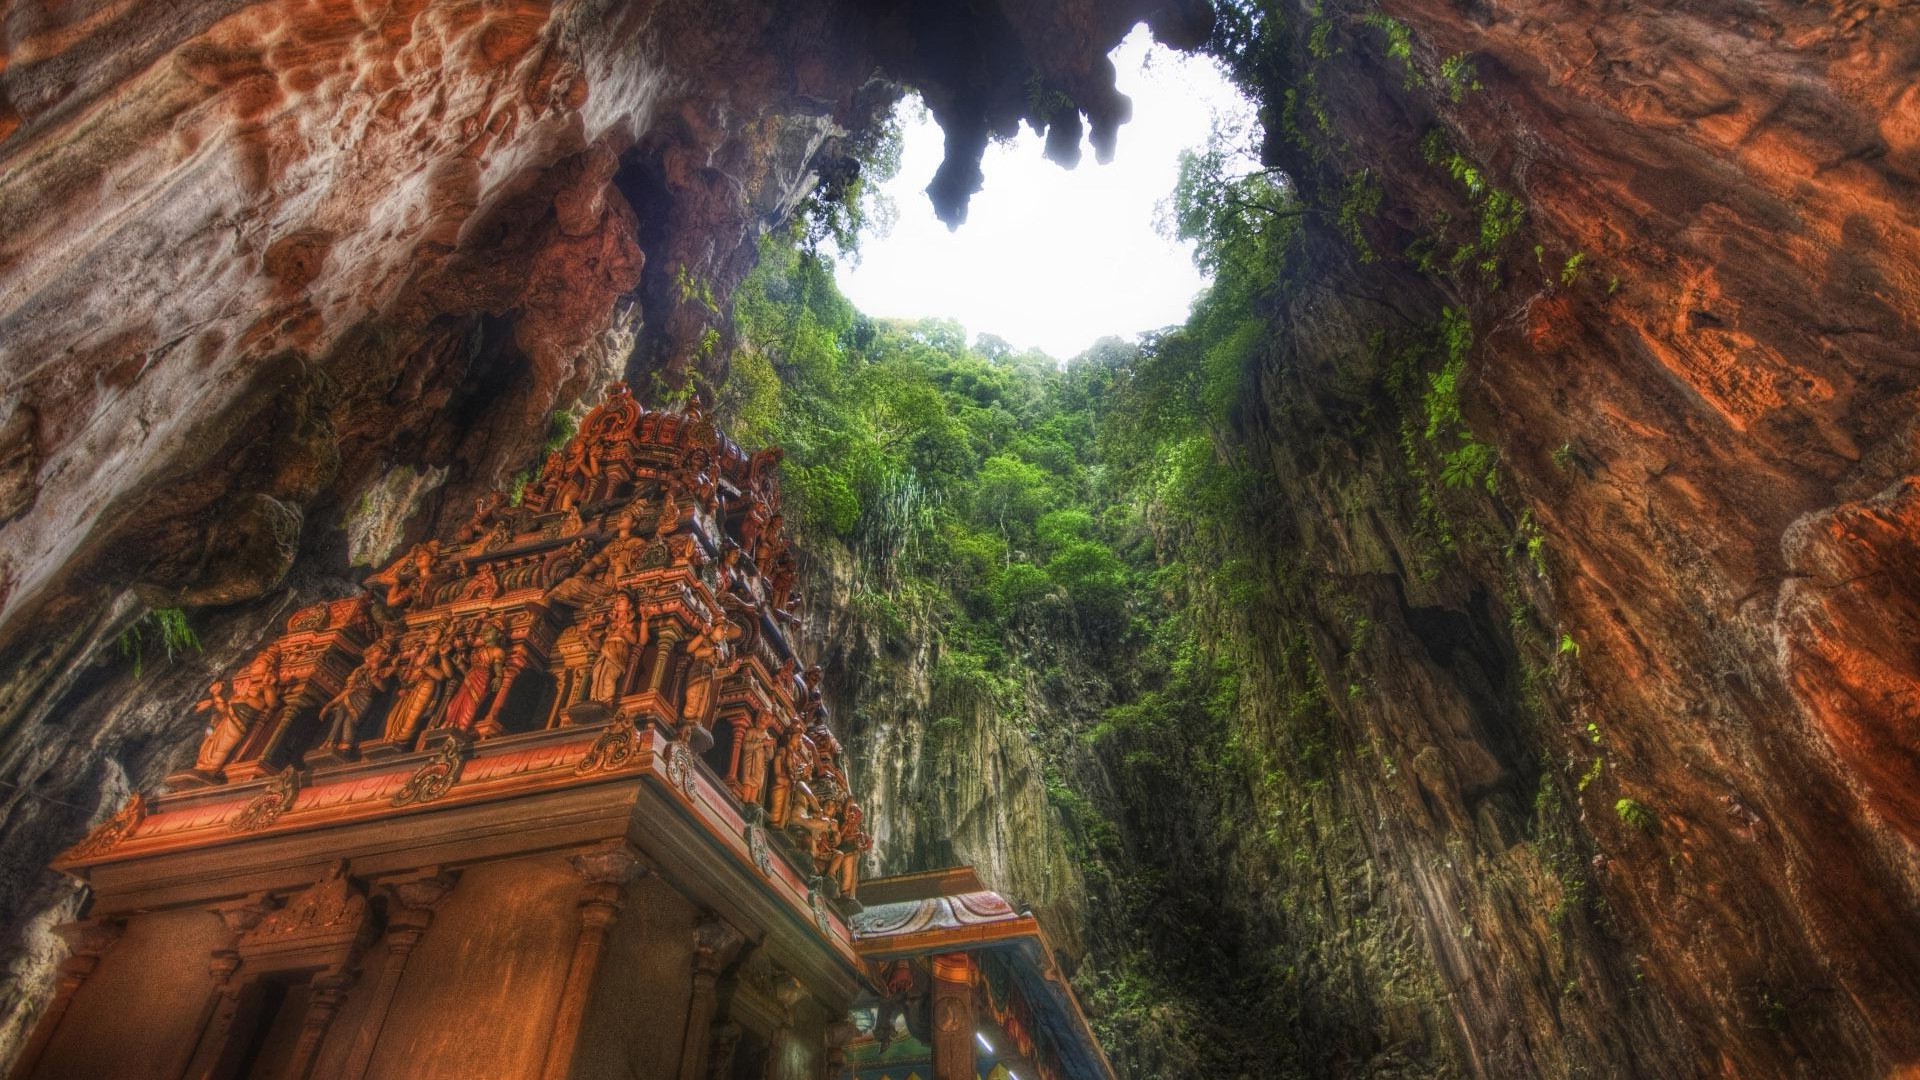 nature, Landscape, Architecture, Trees, Rock, Malaysia, Cave, HDR, Tower, Ruin, Sculpture Wallpaper